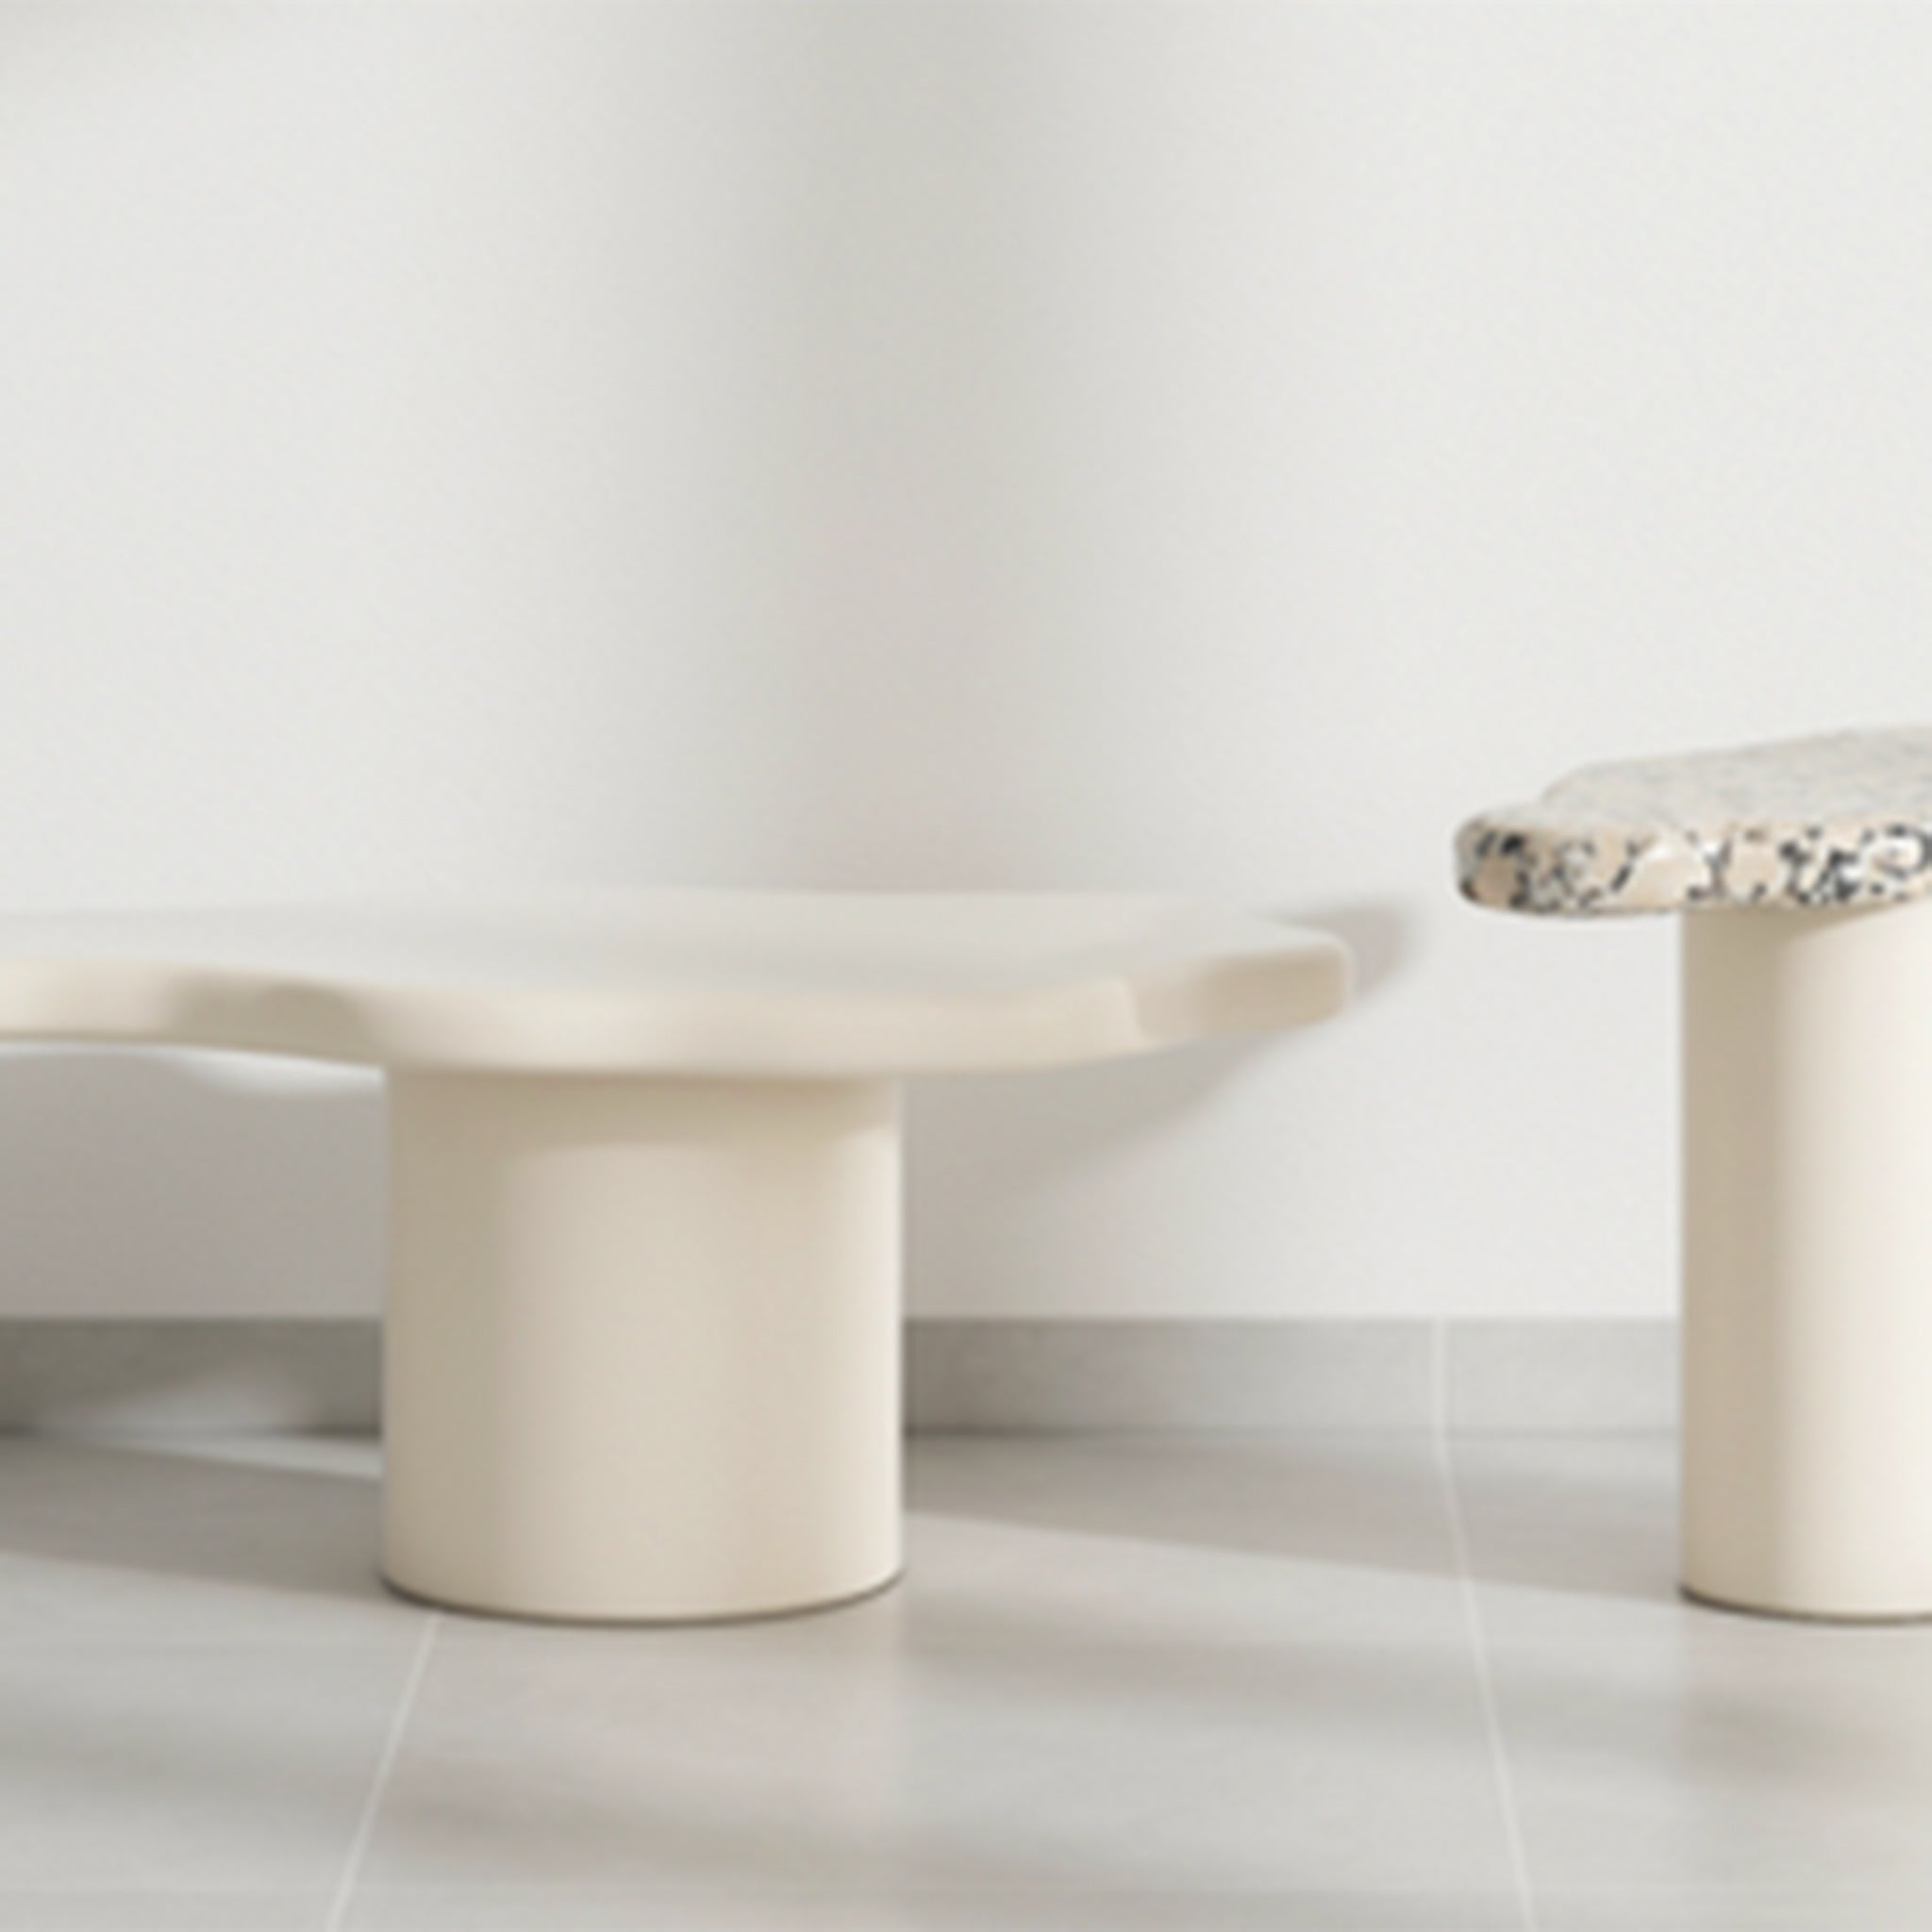 Round Nesting Coffee Tables: The Elon Tables with a modern and functional design.